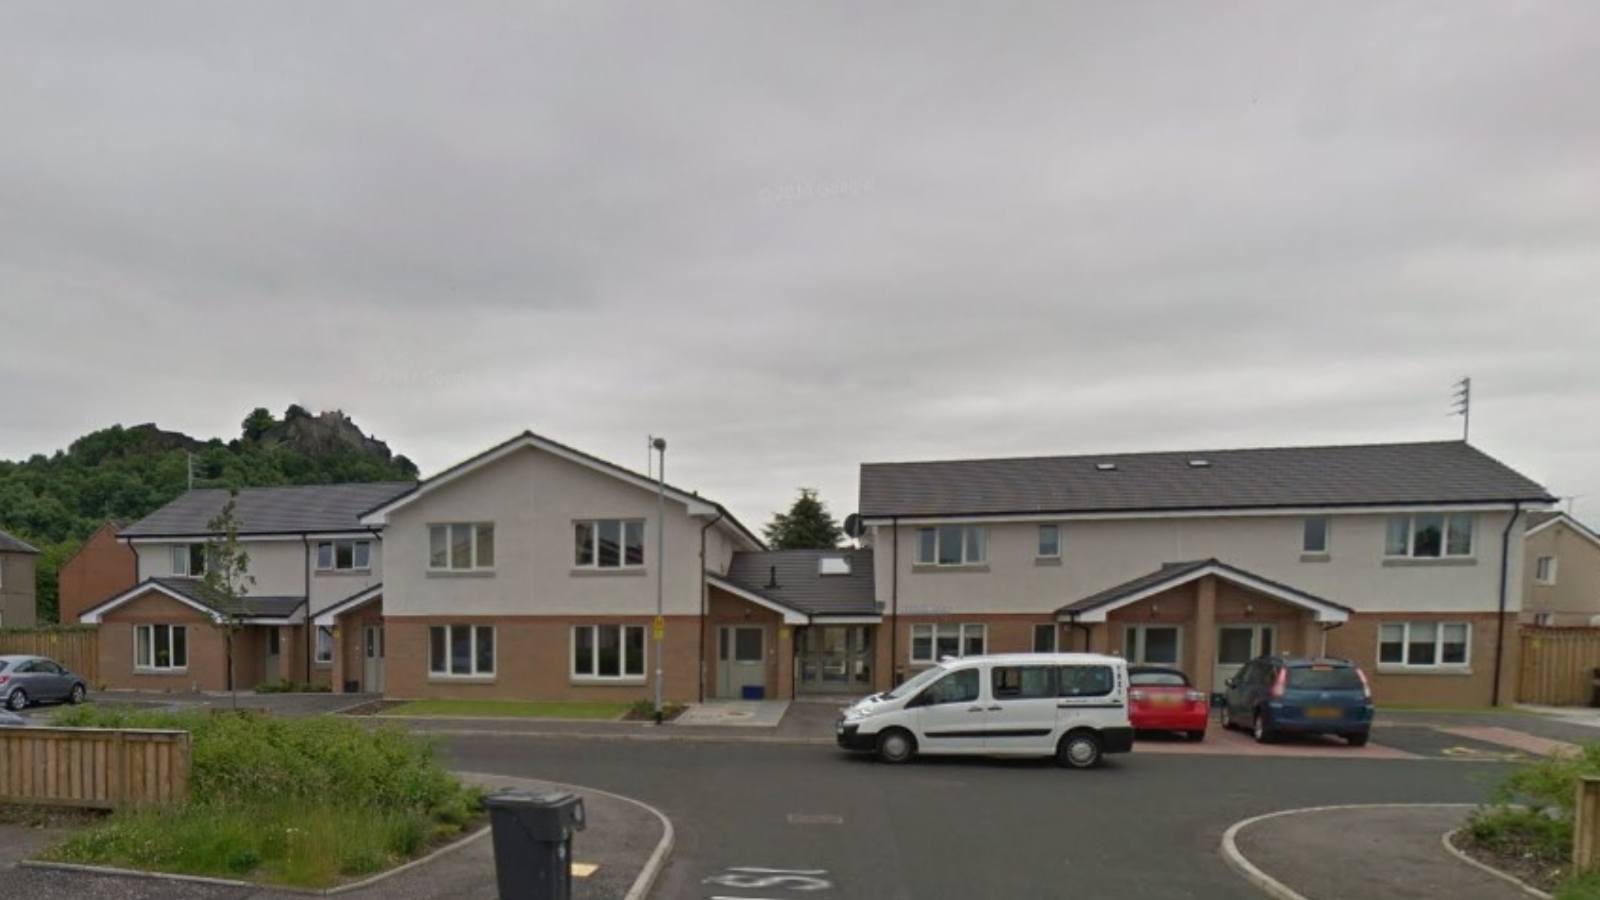 The incident occurred at the assisted housing on Craighall Street in Stirling.